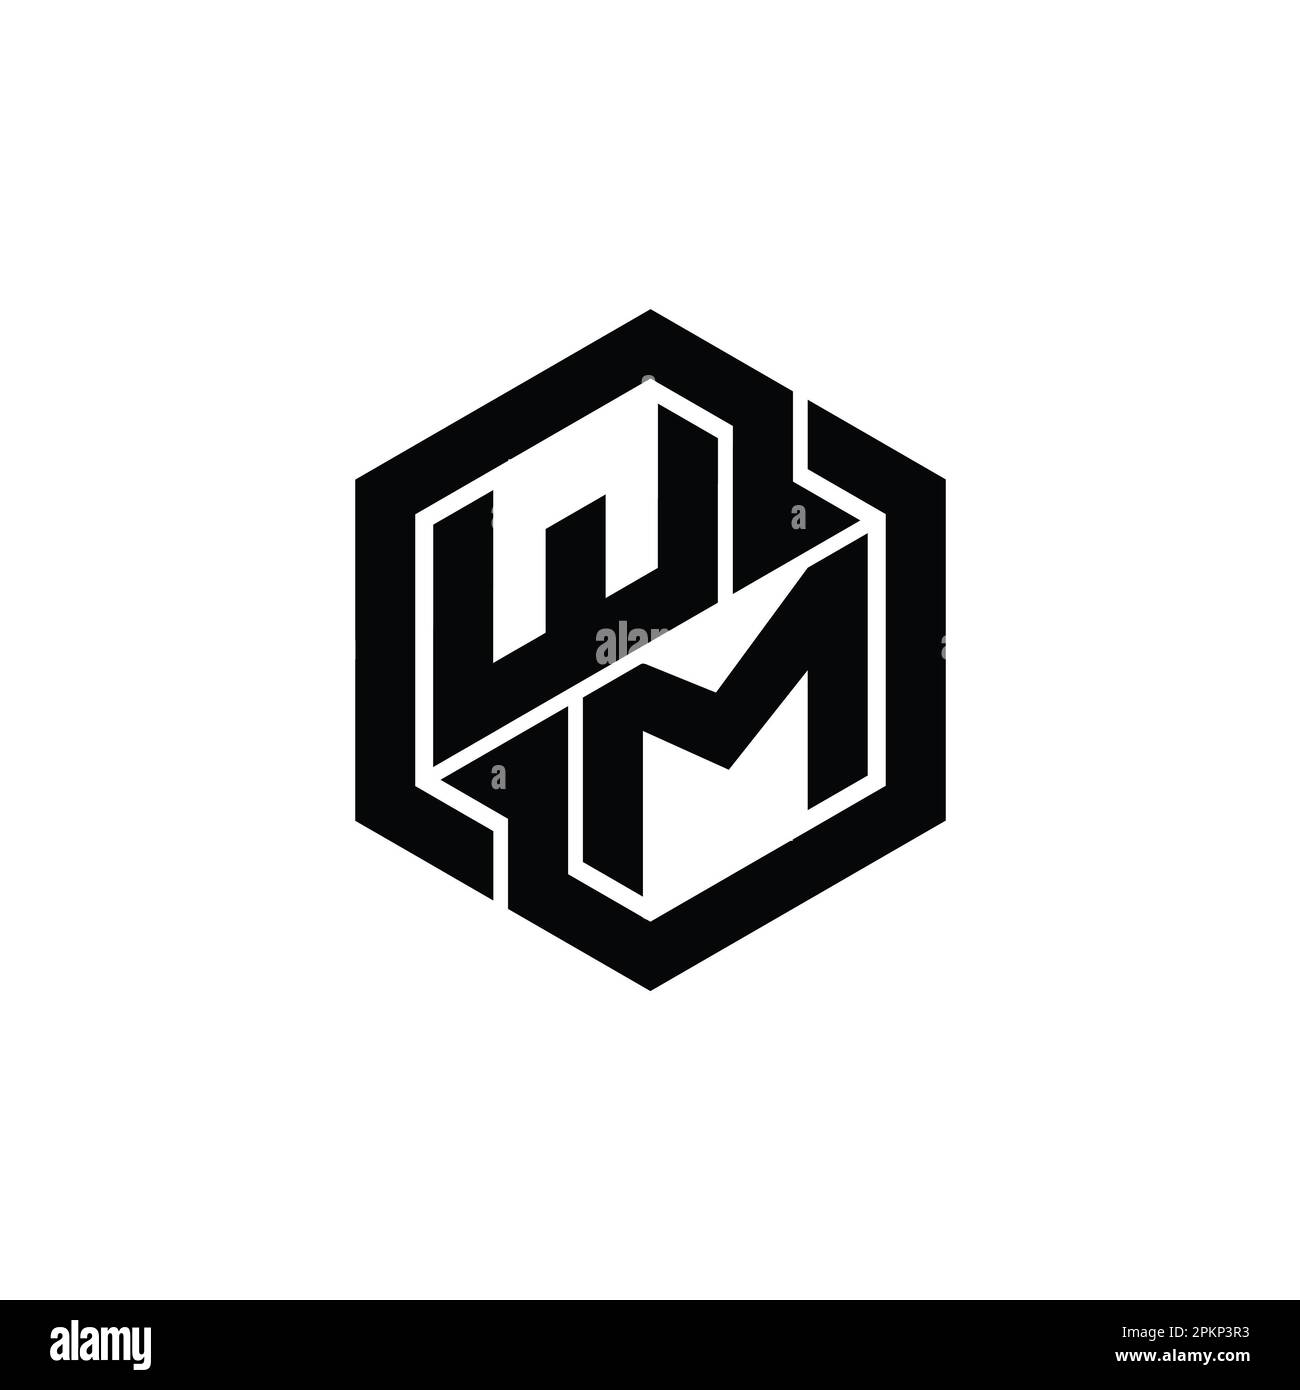 Wm logo Cut Out Stock Images & Pictures - Alamy